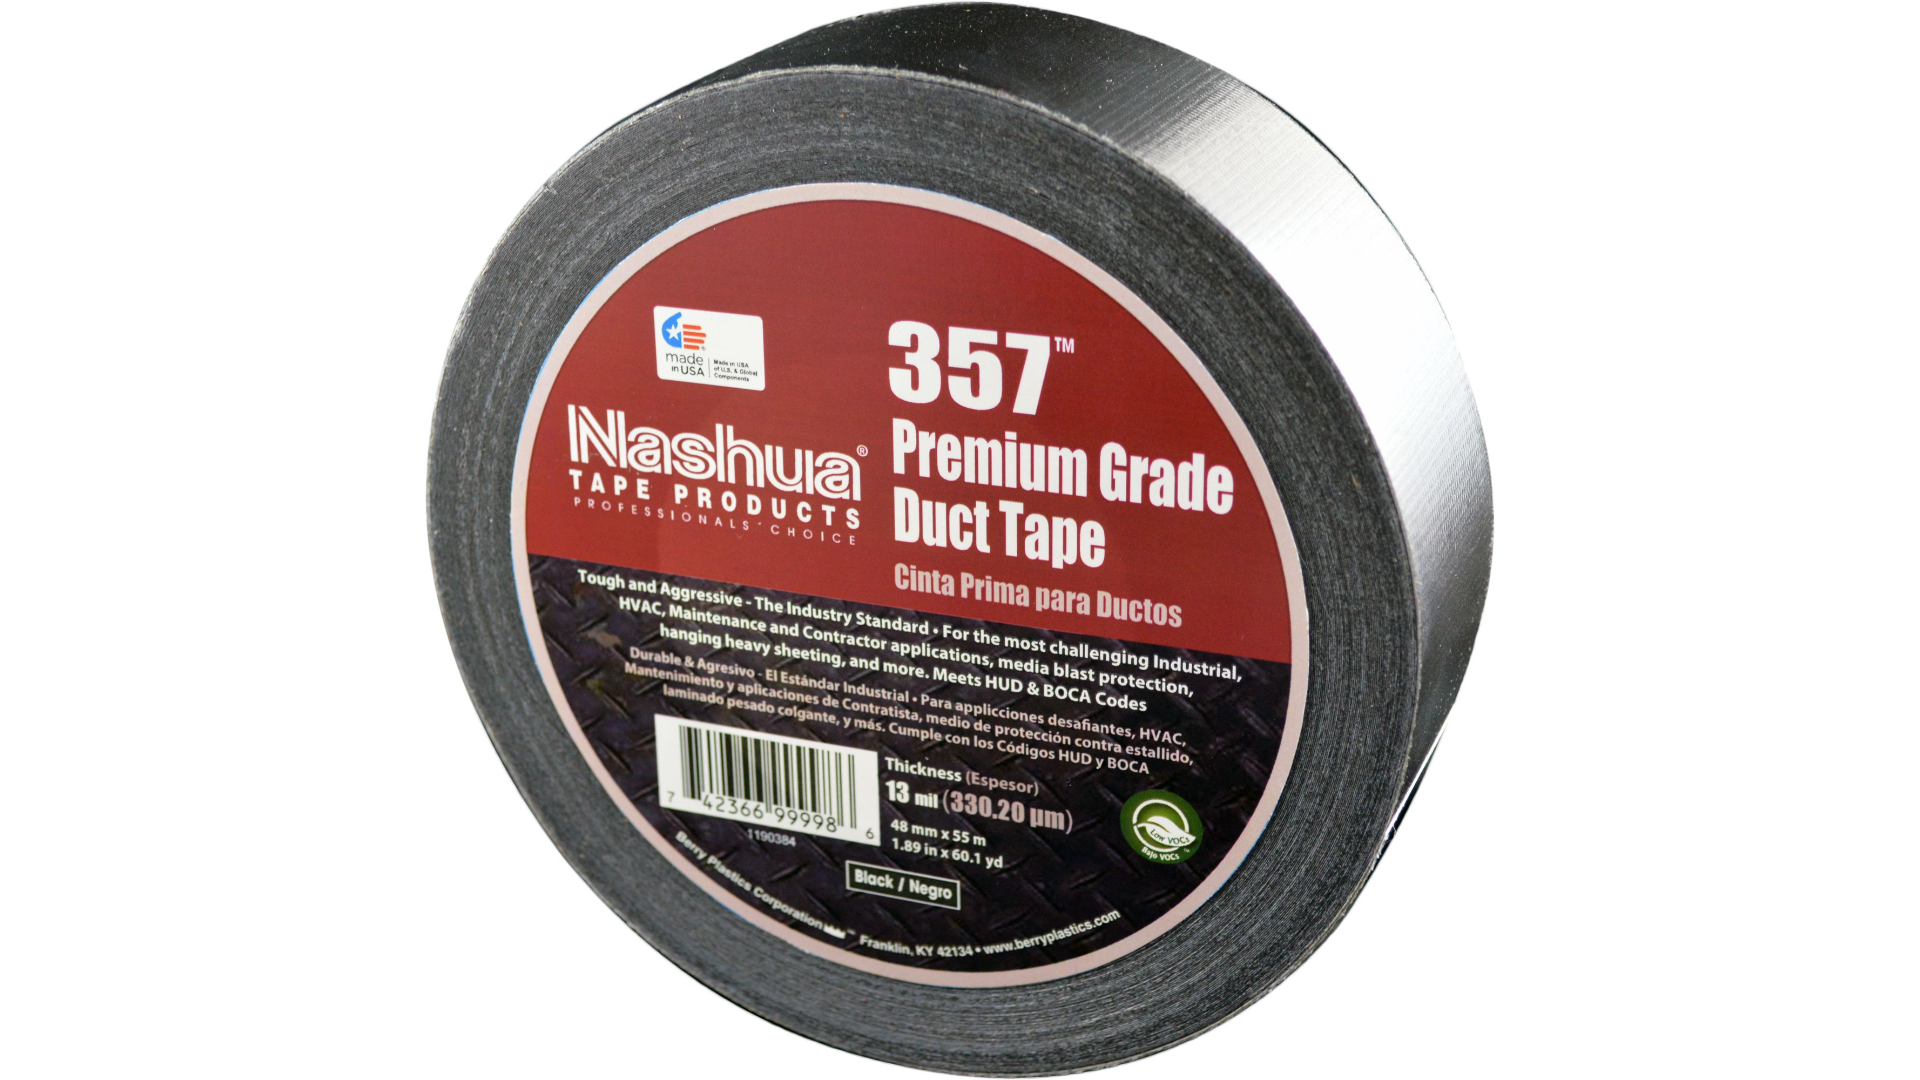 1500-2B 2IN BLACK DUCT TAPE - Tapes